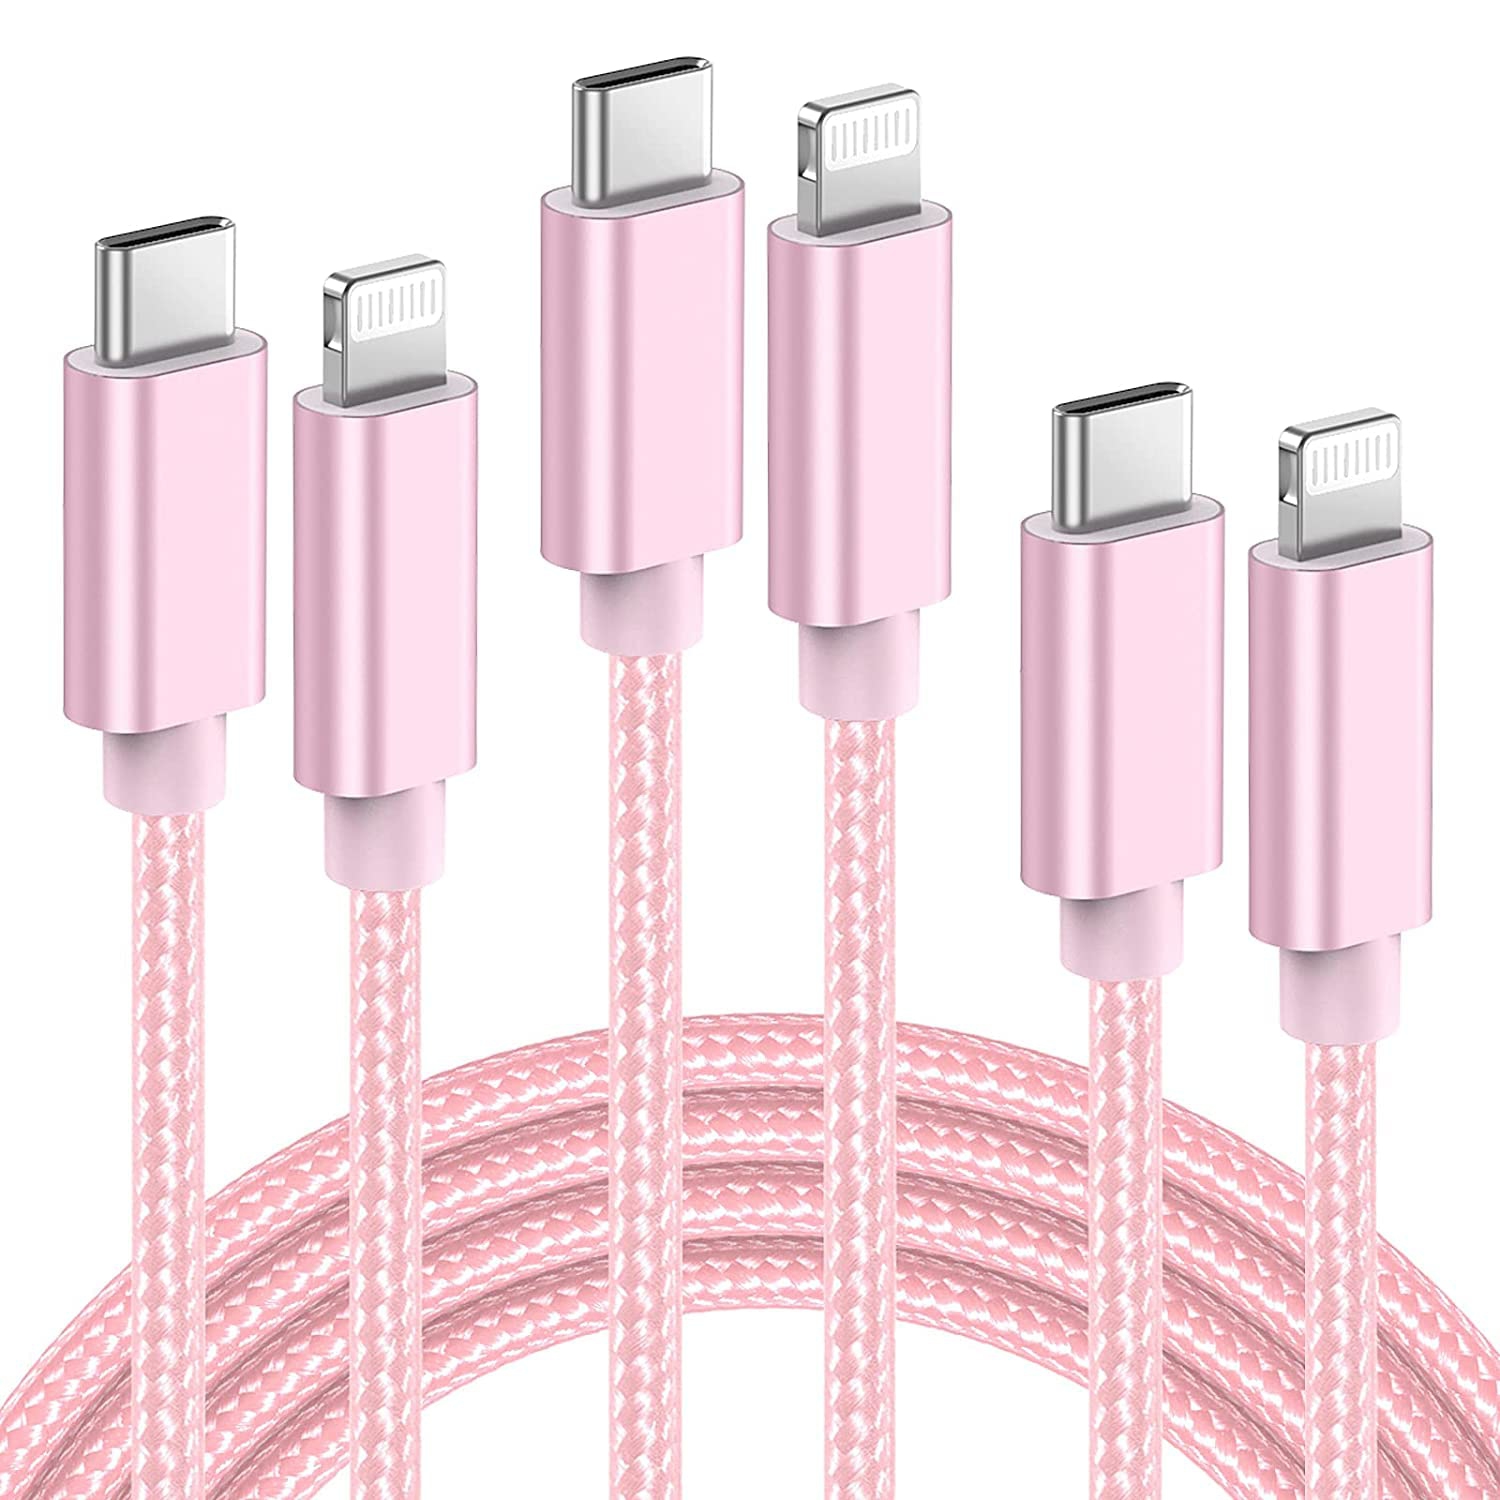 USB C to Lightning Cable MFi Certified, 3Pack 3/6/10Ft iPhone Cable, Premium Nylon Braid USB Type C Fast